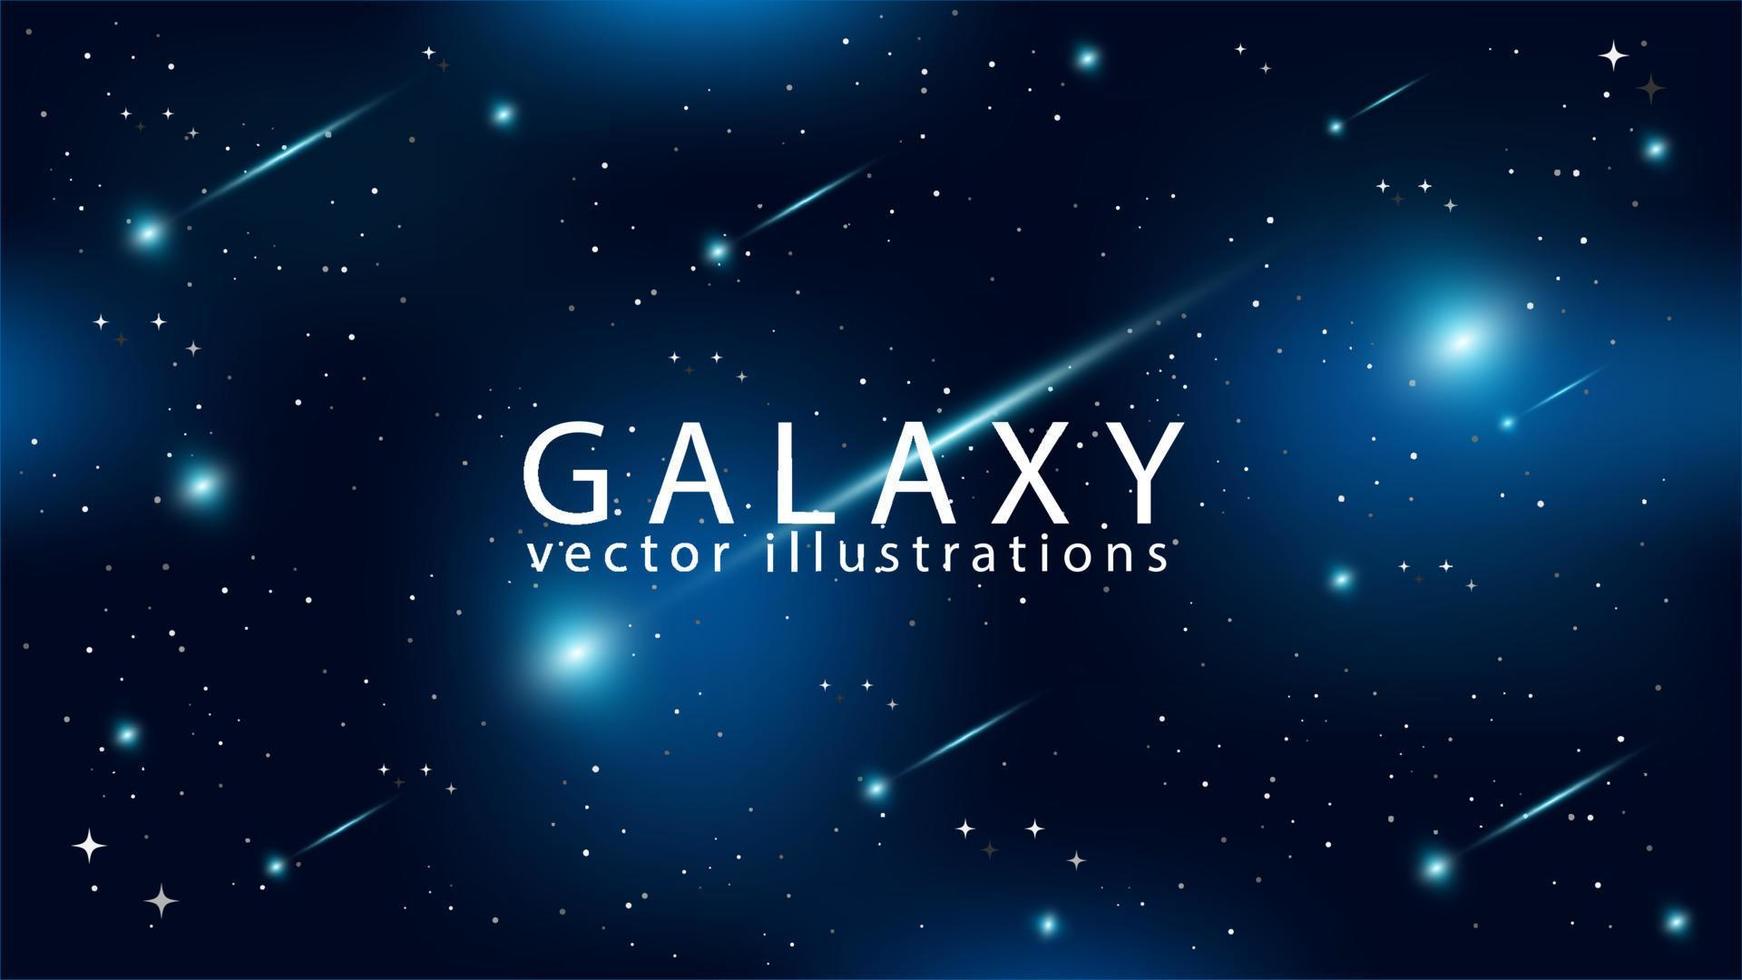 Galaxy space background with abstract shape and stars. Vector illustration